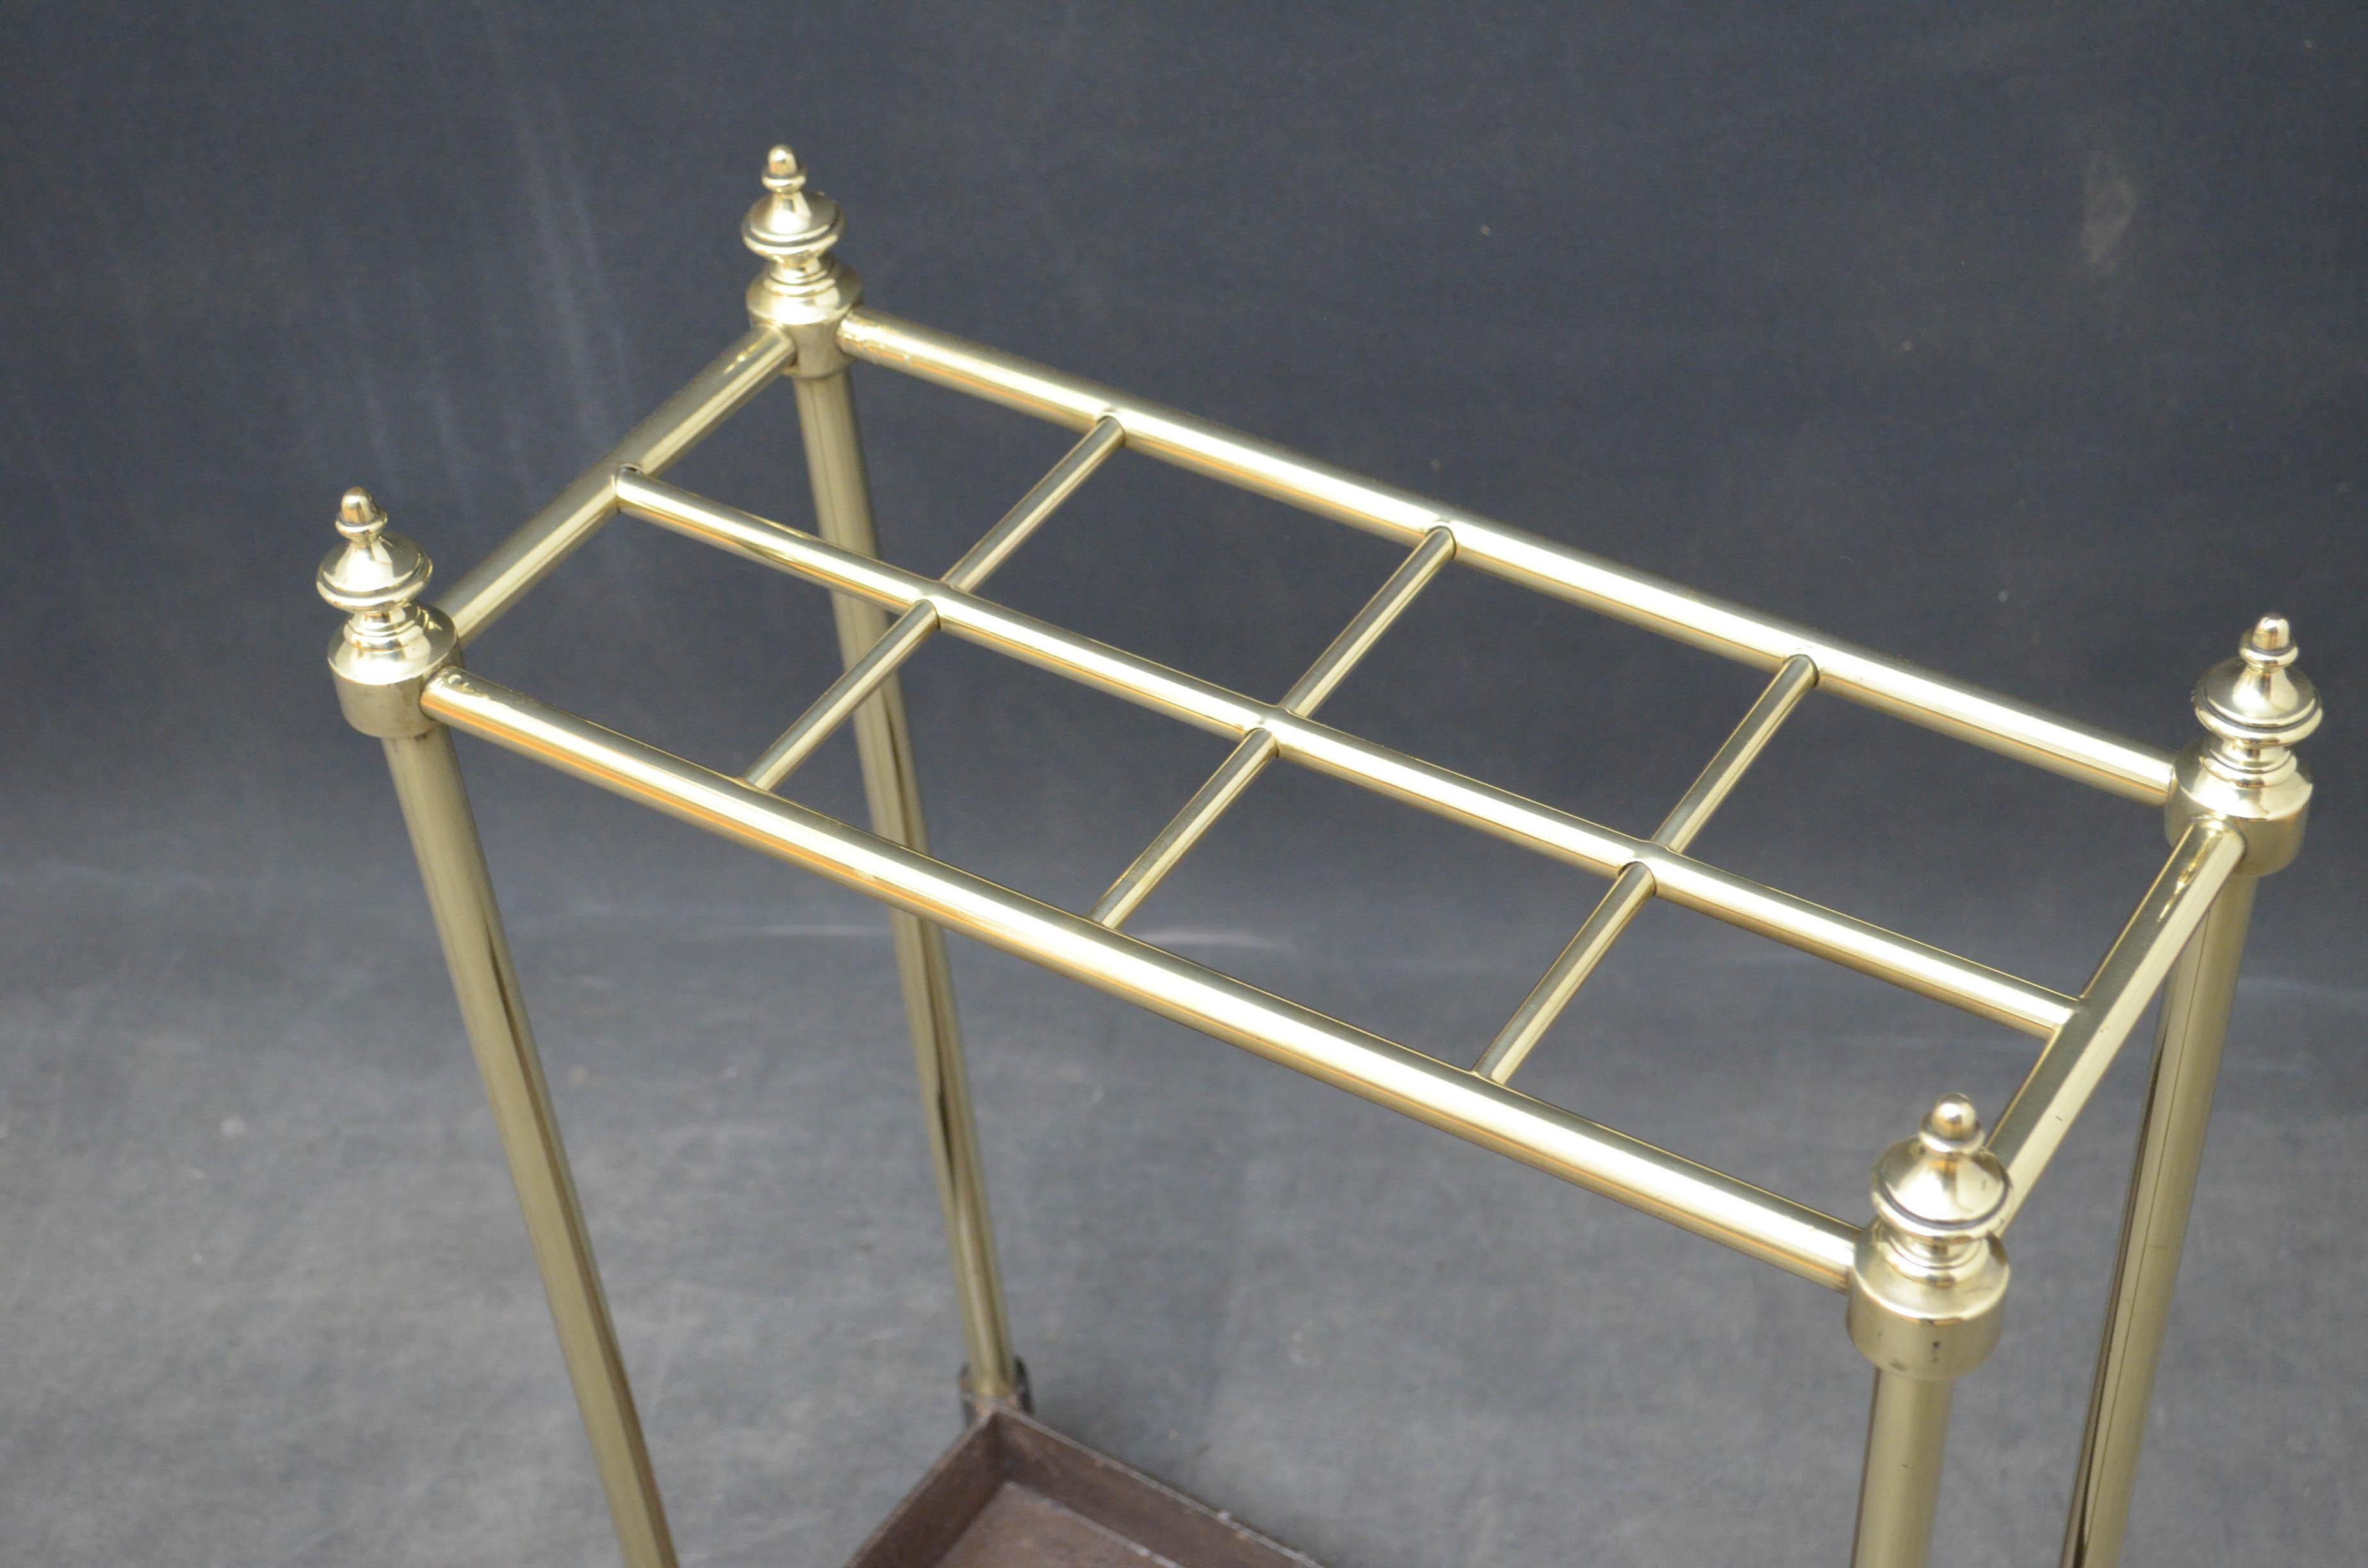 Sn4832, a Victorian brass umbrella stand / stick stand, having 8 sections for umbrellas and walking sticks with finials and cast iron drip tray, all in fantastic condition throughout, ready to place at home, circa 1880
Measures: H 26